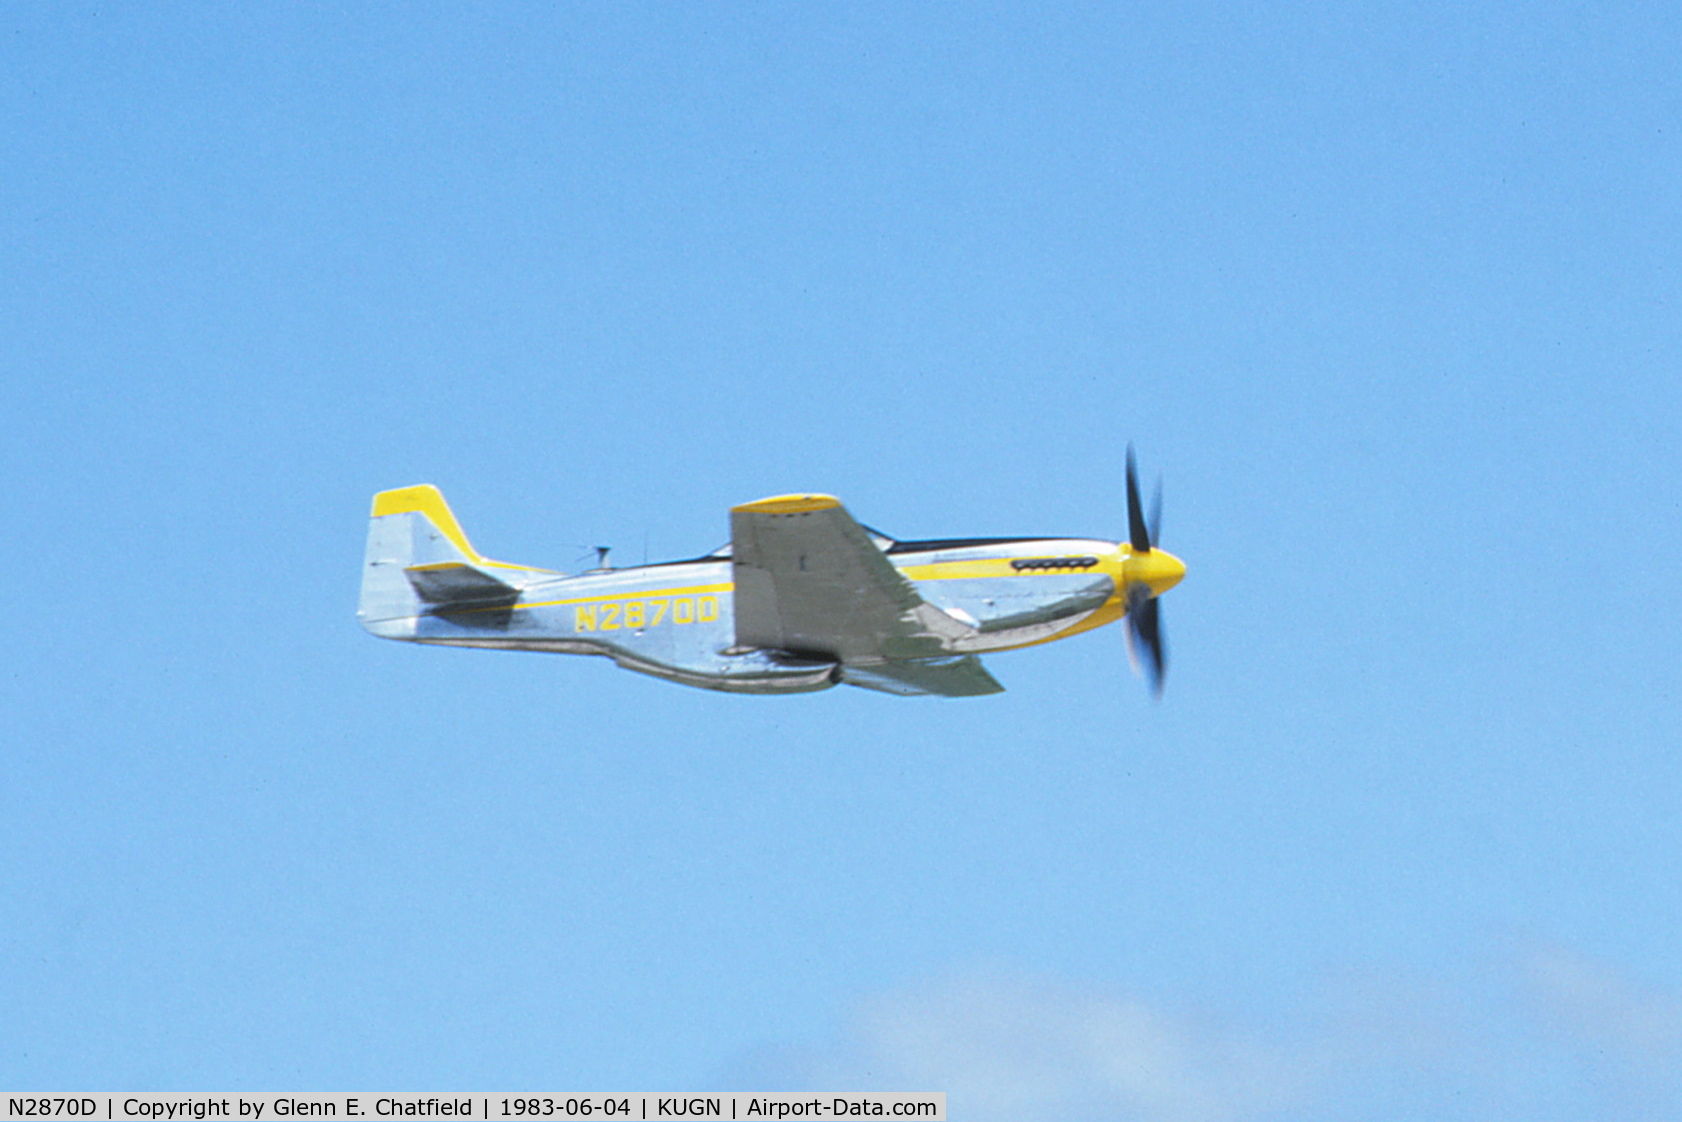 N2870D, North American F-51D Mustang C/N 44-63350, Air show fly by